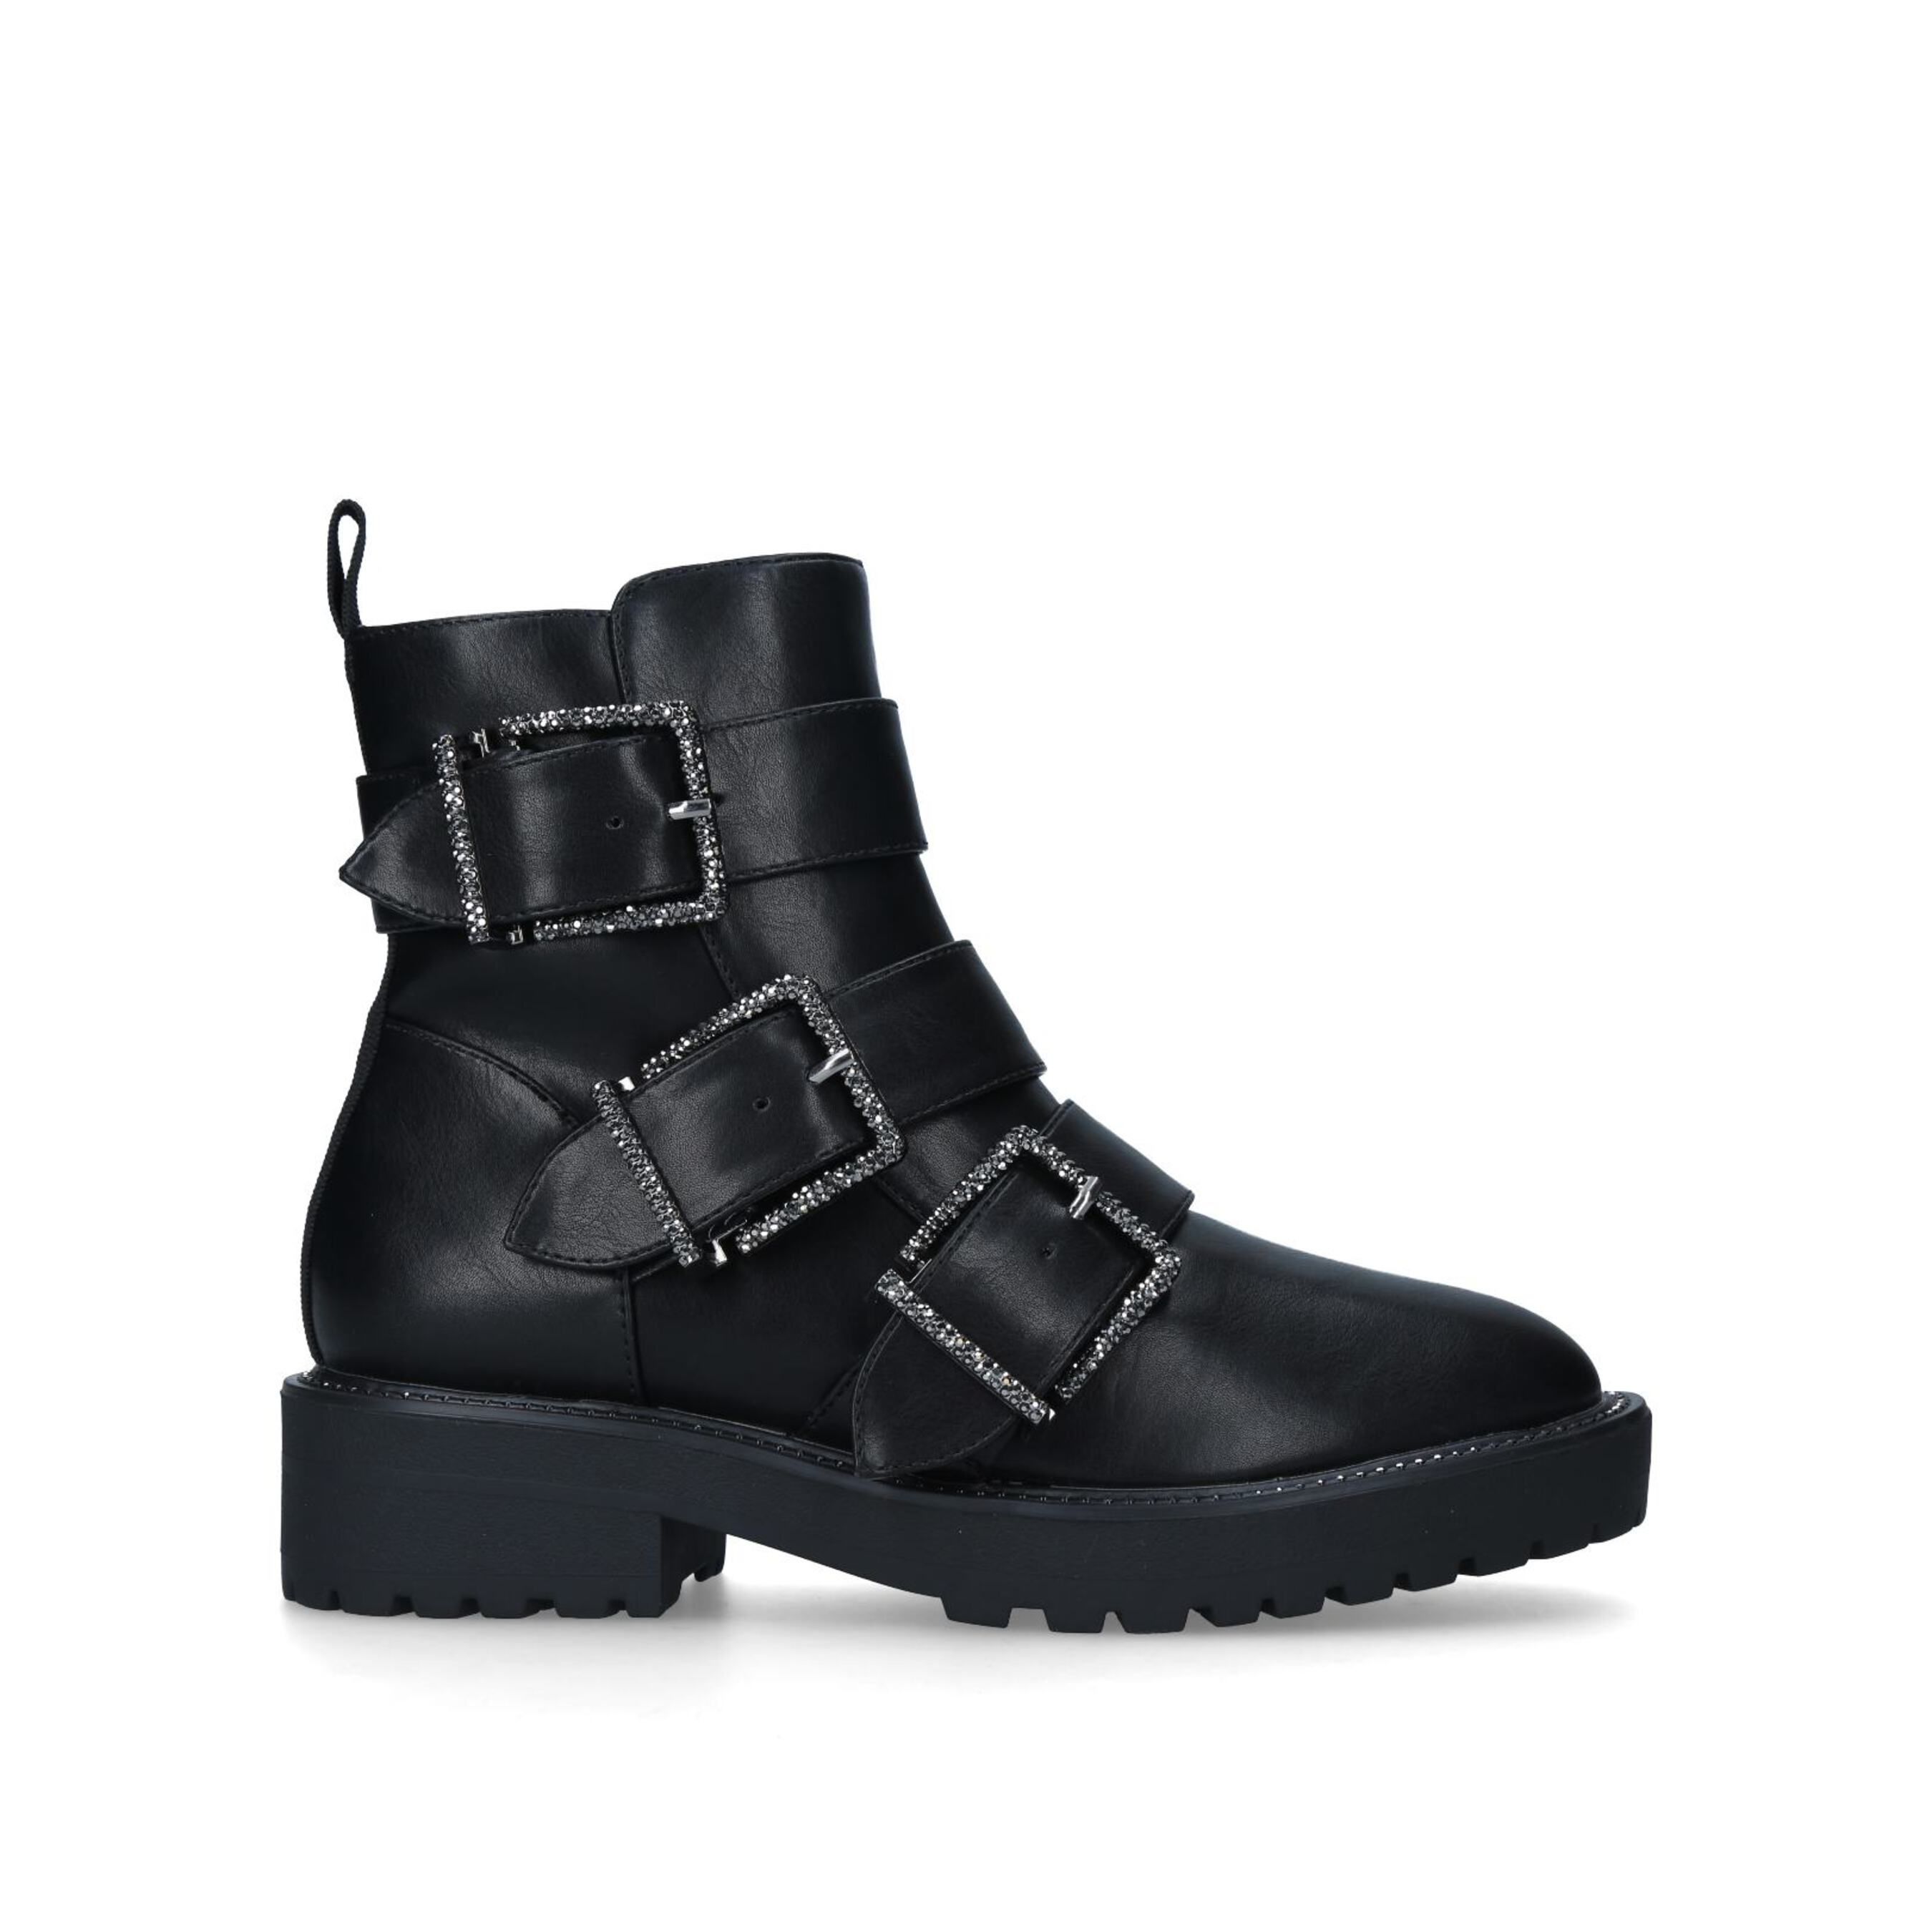 The Trixie2 ankle boot arrives in black with three straps across the foot that are fastened with crystal covered buckles. The KG Kurt Geiger logo printed on ribbed textile with a print stitch detailing is seen at the back of the ankle.